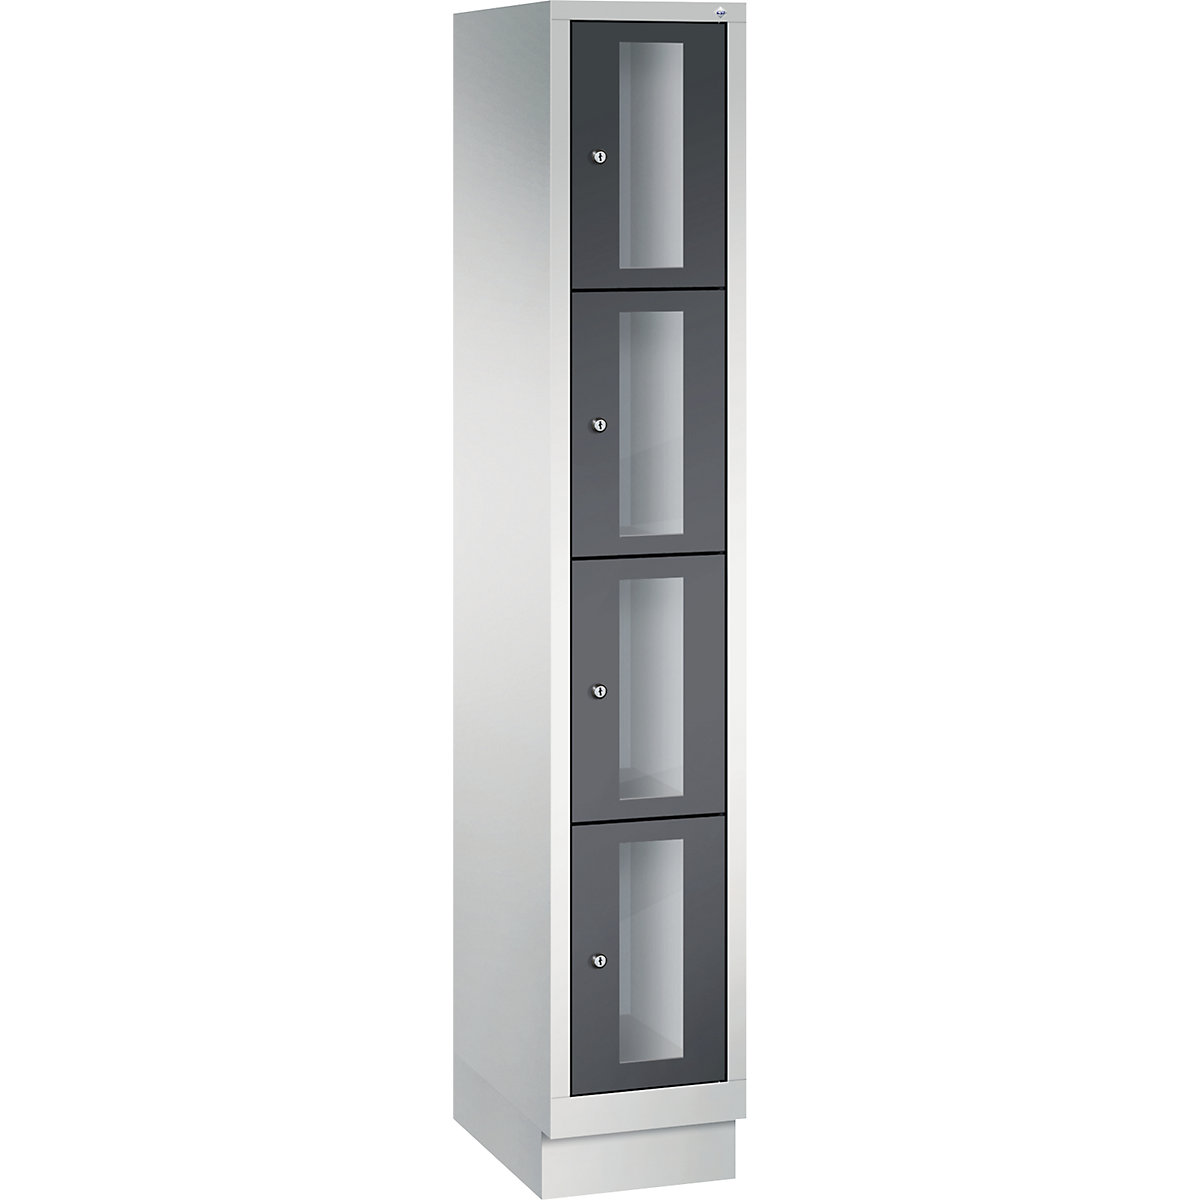 C+P – CLASSIC locker unit, compartment height 375 mm, with plinth, 4 compartments, width 320 mm, black grey door